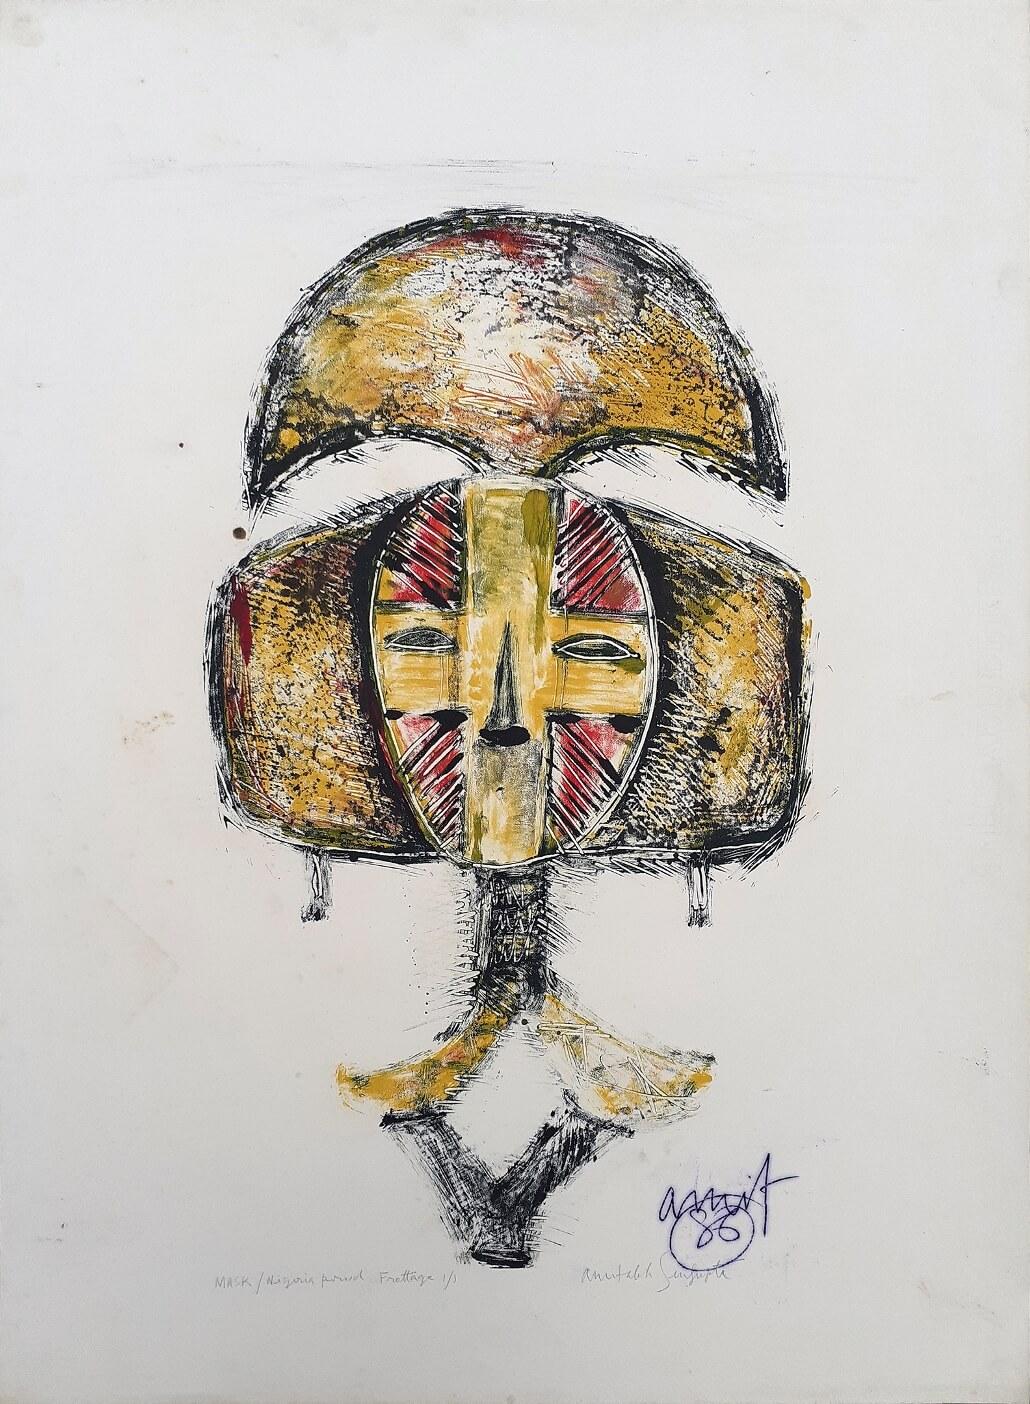 Mask Nigeria Period, Frottage on Paper, Edition 1/1 by Indian Artist "In Stock" - Mixed Media Art by Amitabh Sengupta